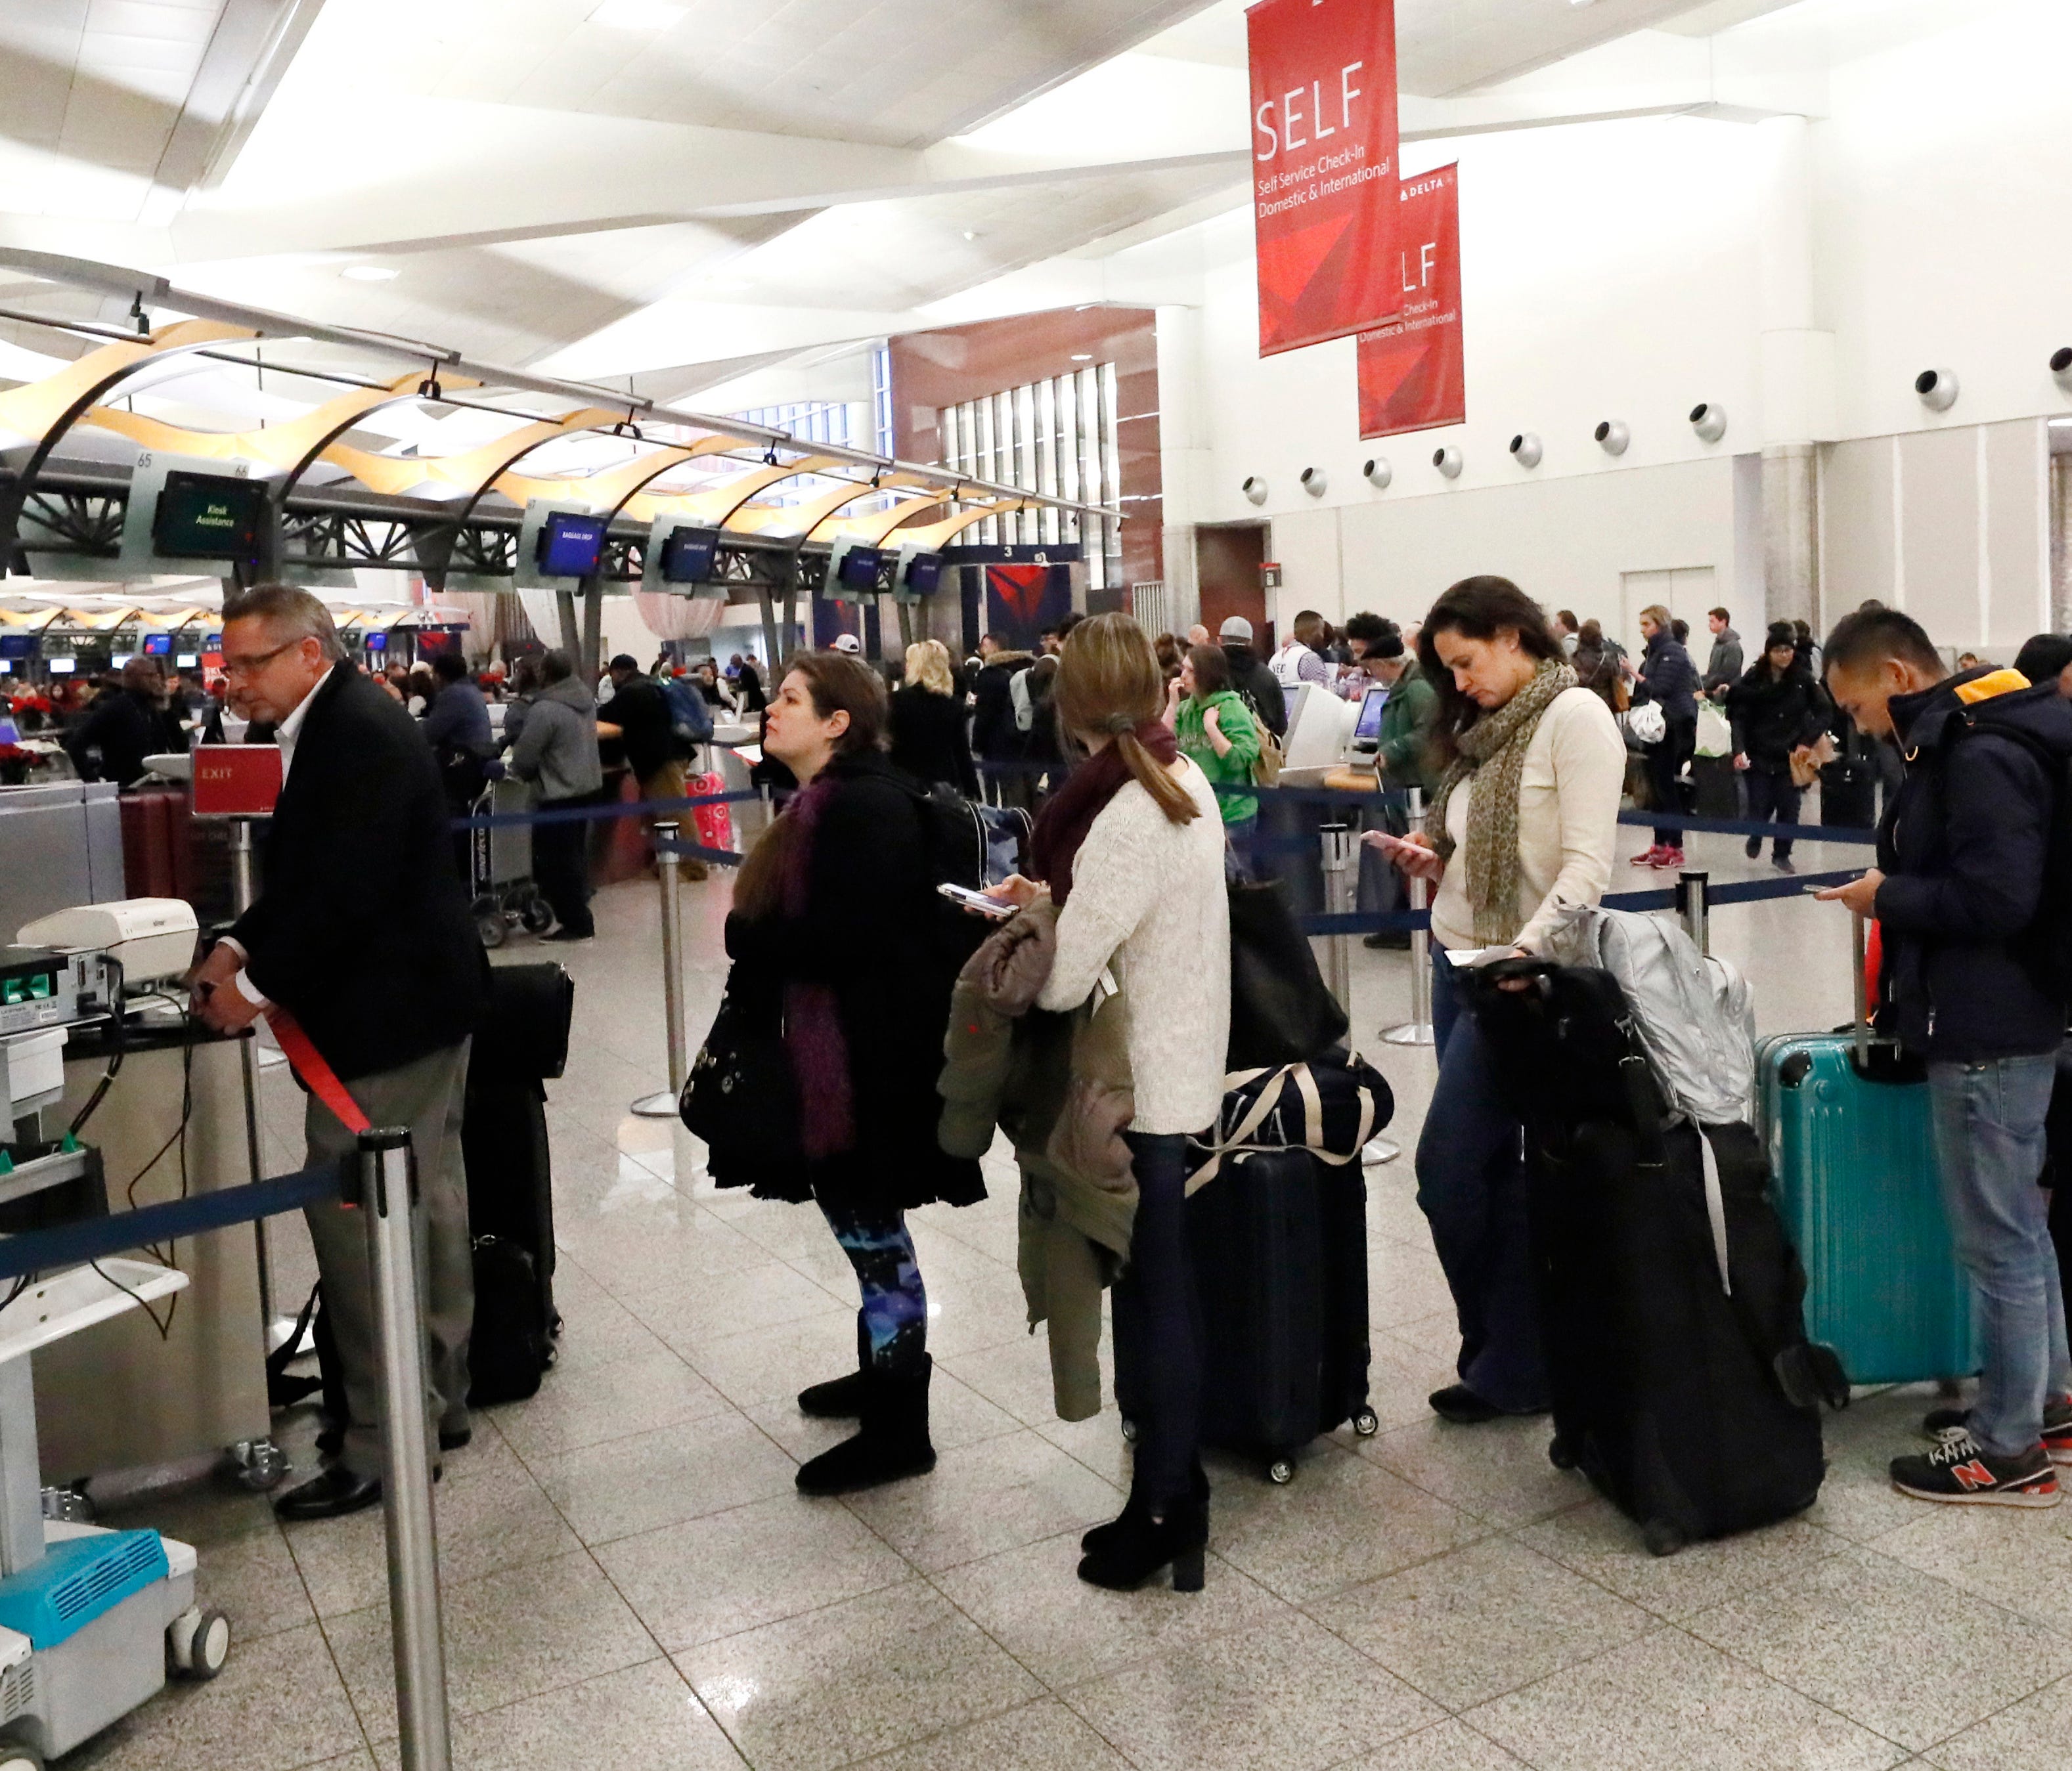 Travelers line up for assistance at Atlanta Hartsfield-Jackson International Airport on Dec. 8, 2017, as hundreds of flights were canceled due to a snowstorm.